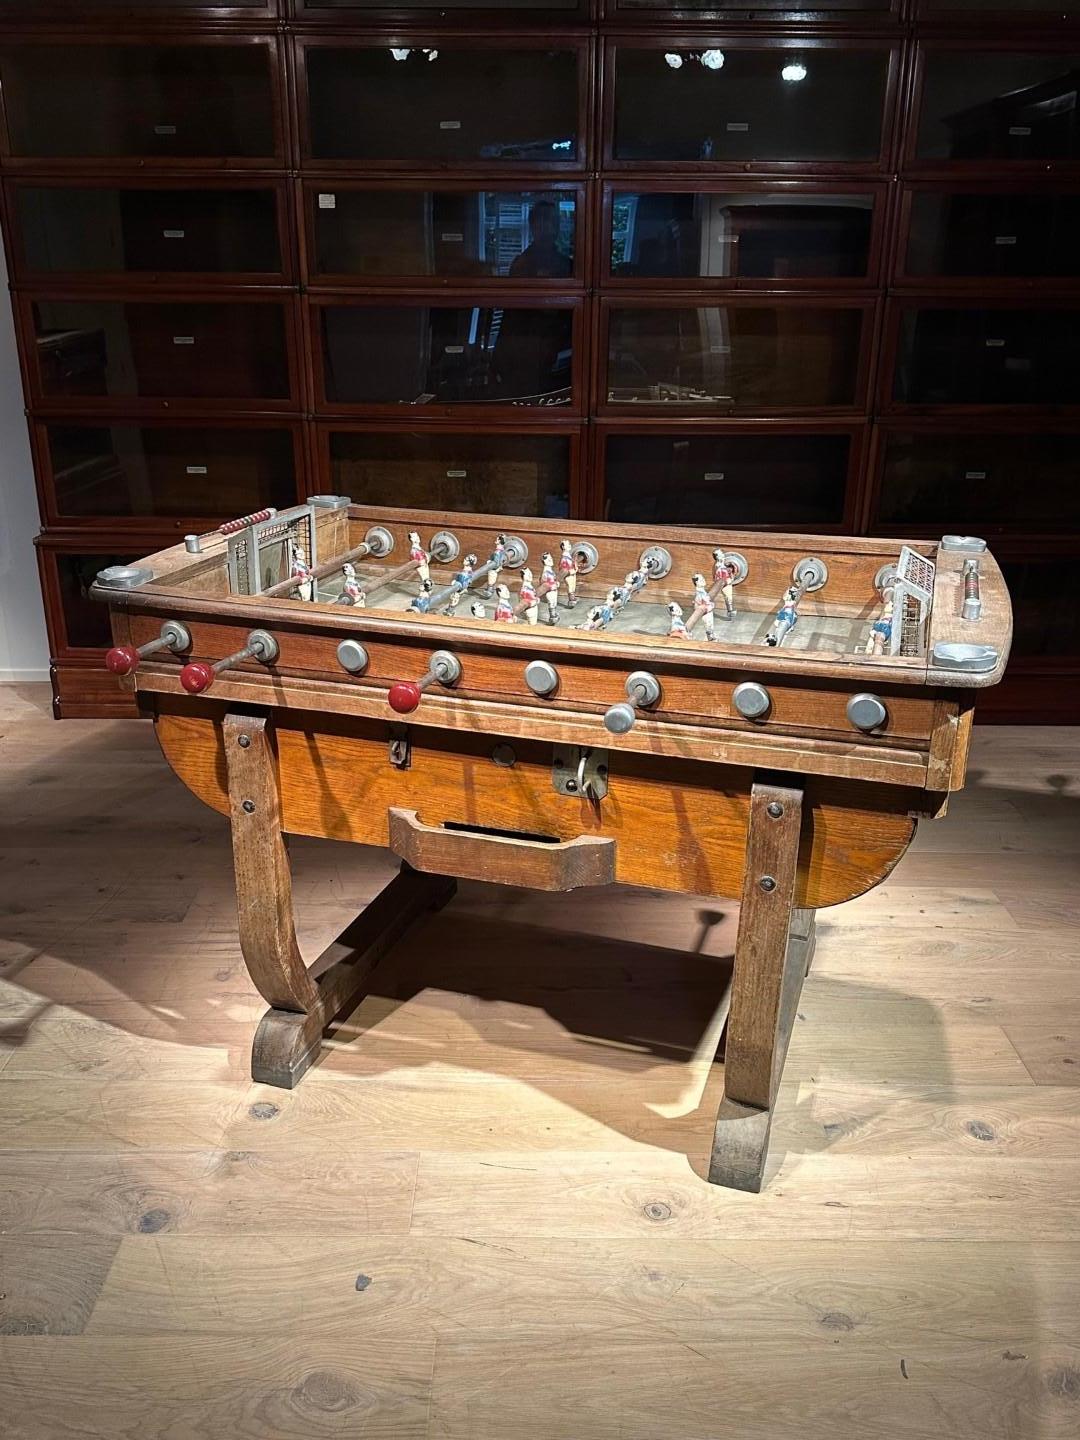 Beautiful vintage foosball table from the 1920s-1940s. The table is made of solid oak except for the playing field and curved bottom. Players are made of metal as are the knobs of the bars. Nice detail the 4 ashtrays! The table is completely in